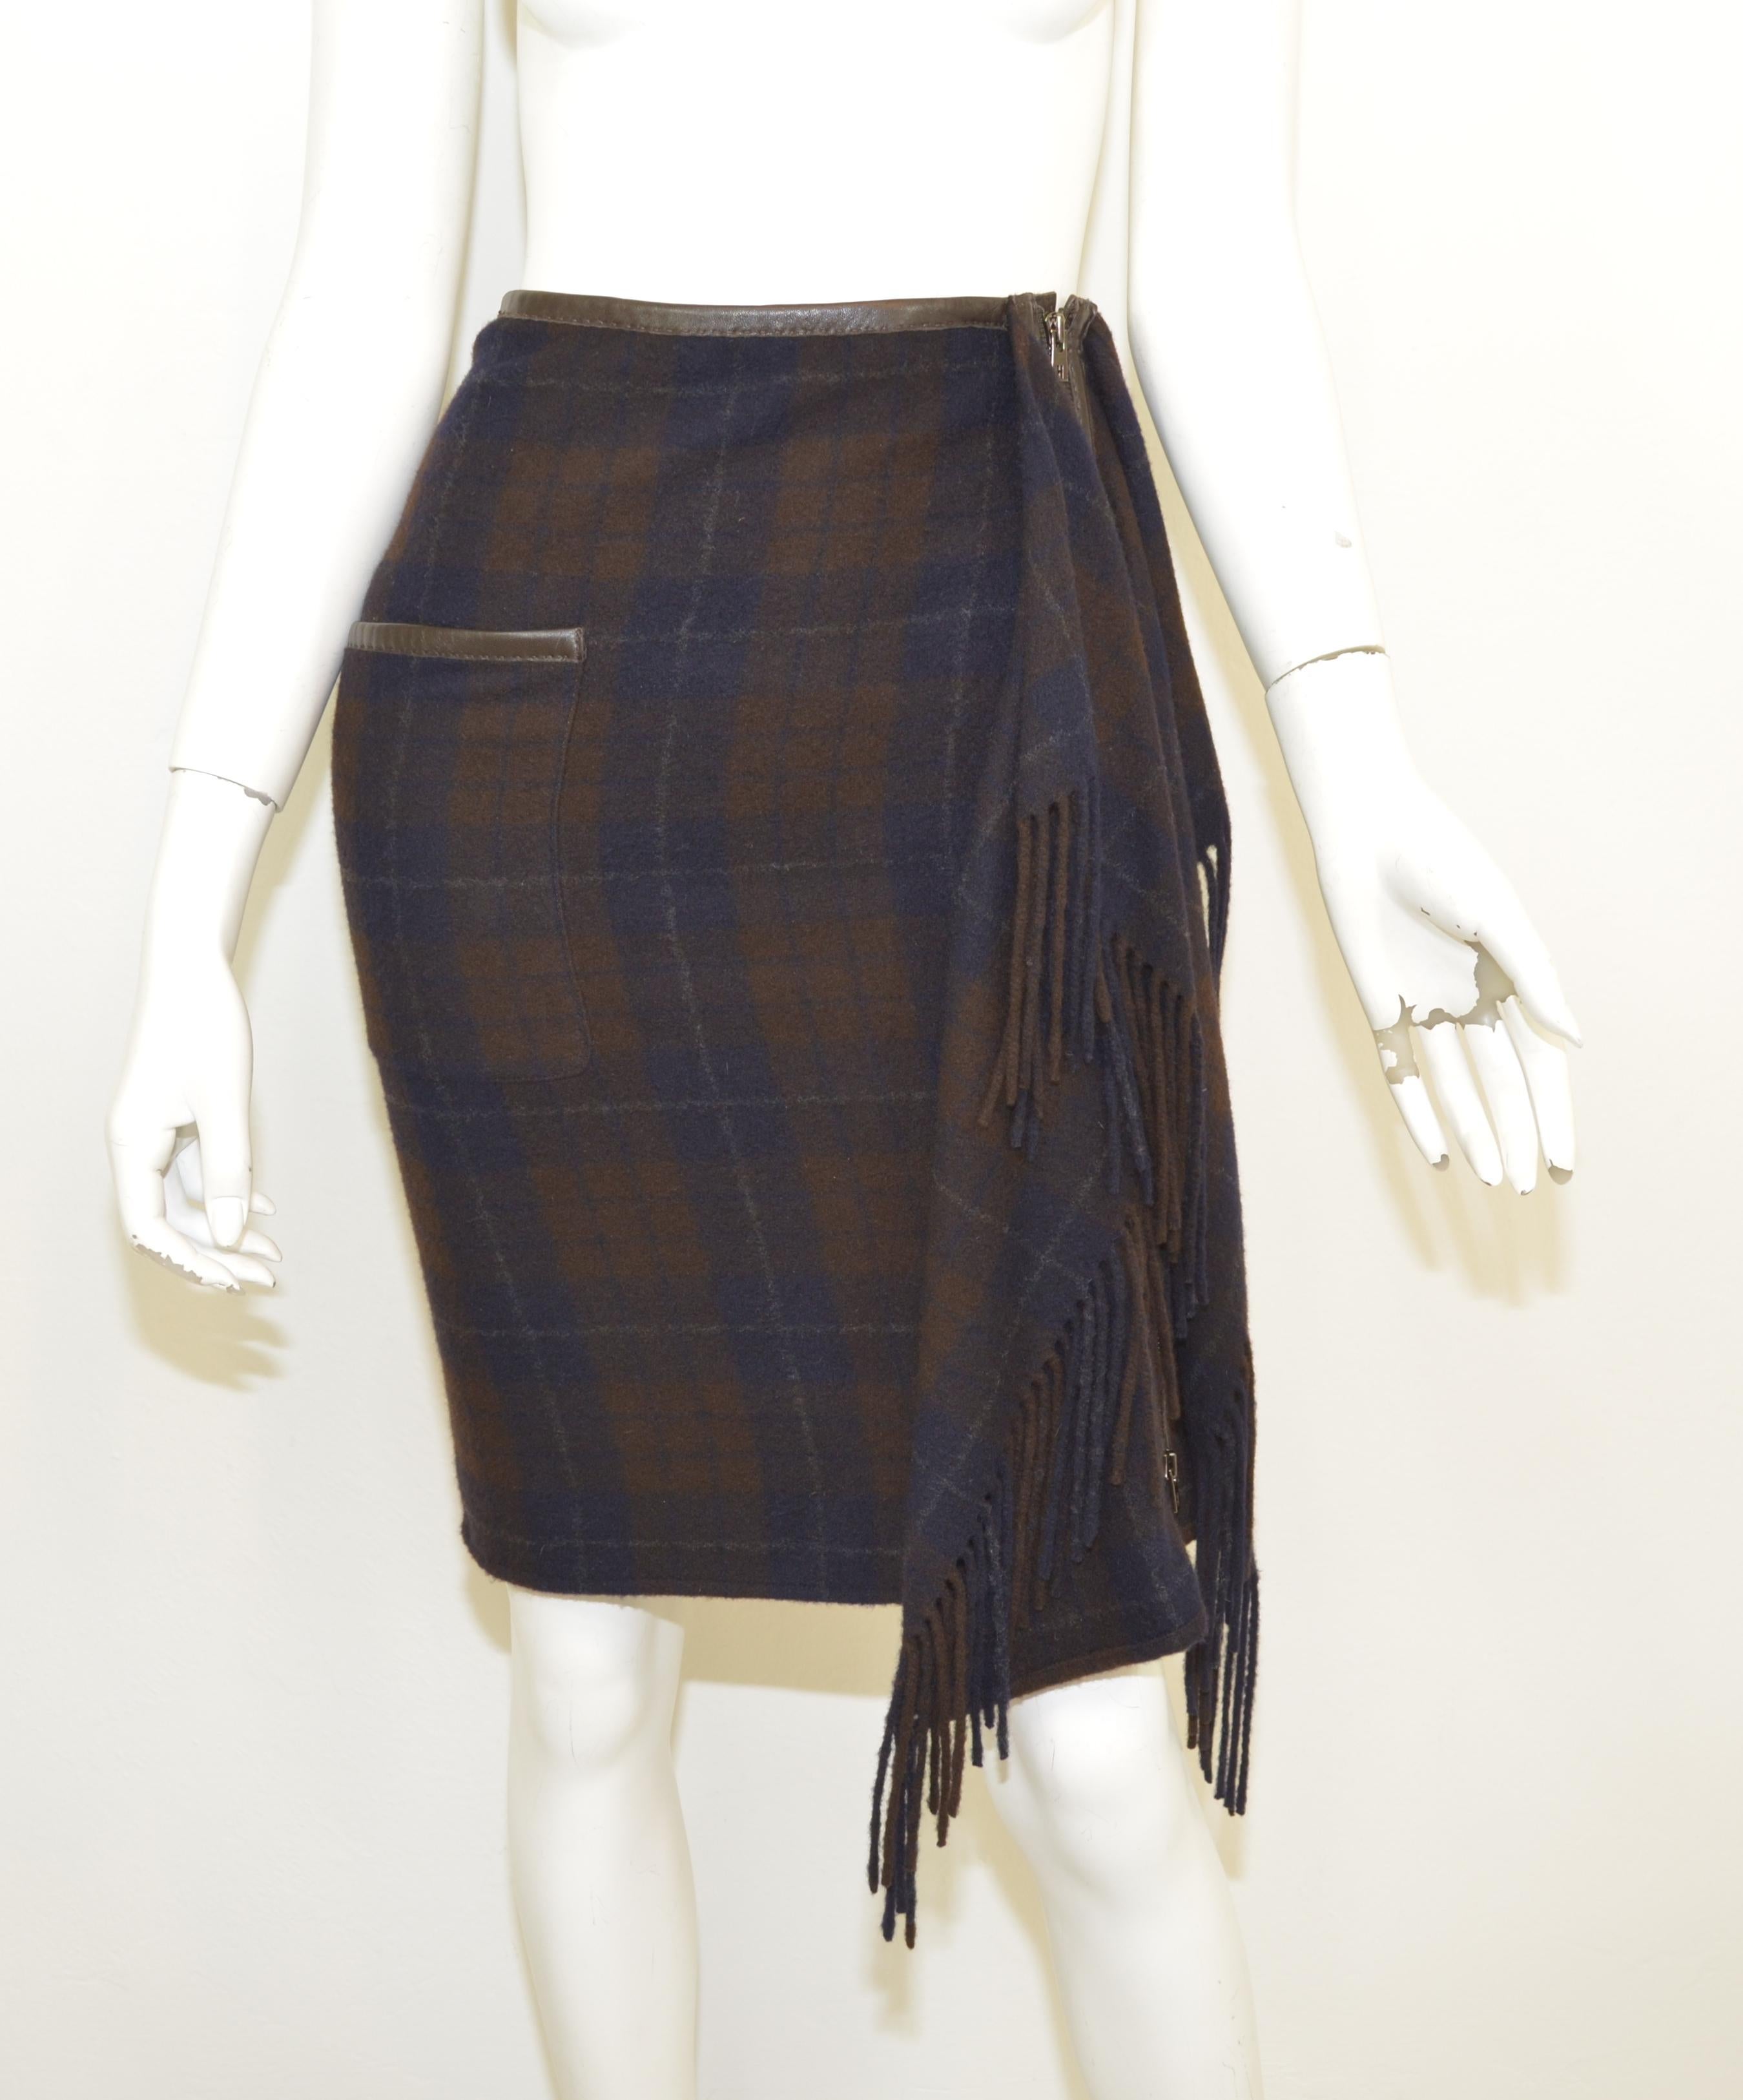 Hermes skirt is featured in a navy and brown plaid pattern throughout with a fringed front panel, leather trimming along the waist line, pocket, and zipper fastening. Skirt is made with 100% cashmere, size 34, made in France. 

Measurements:
Waist